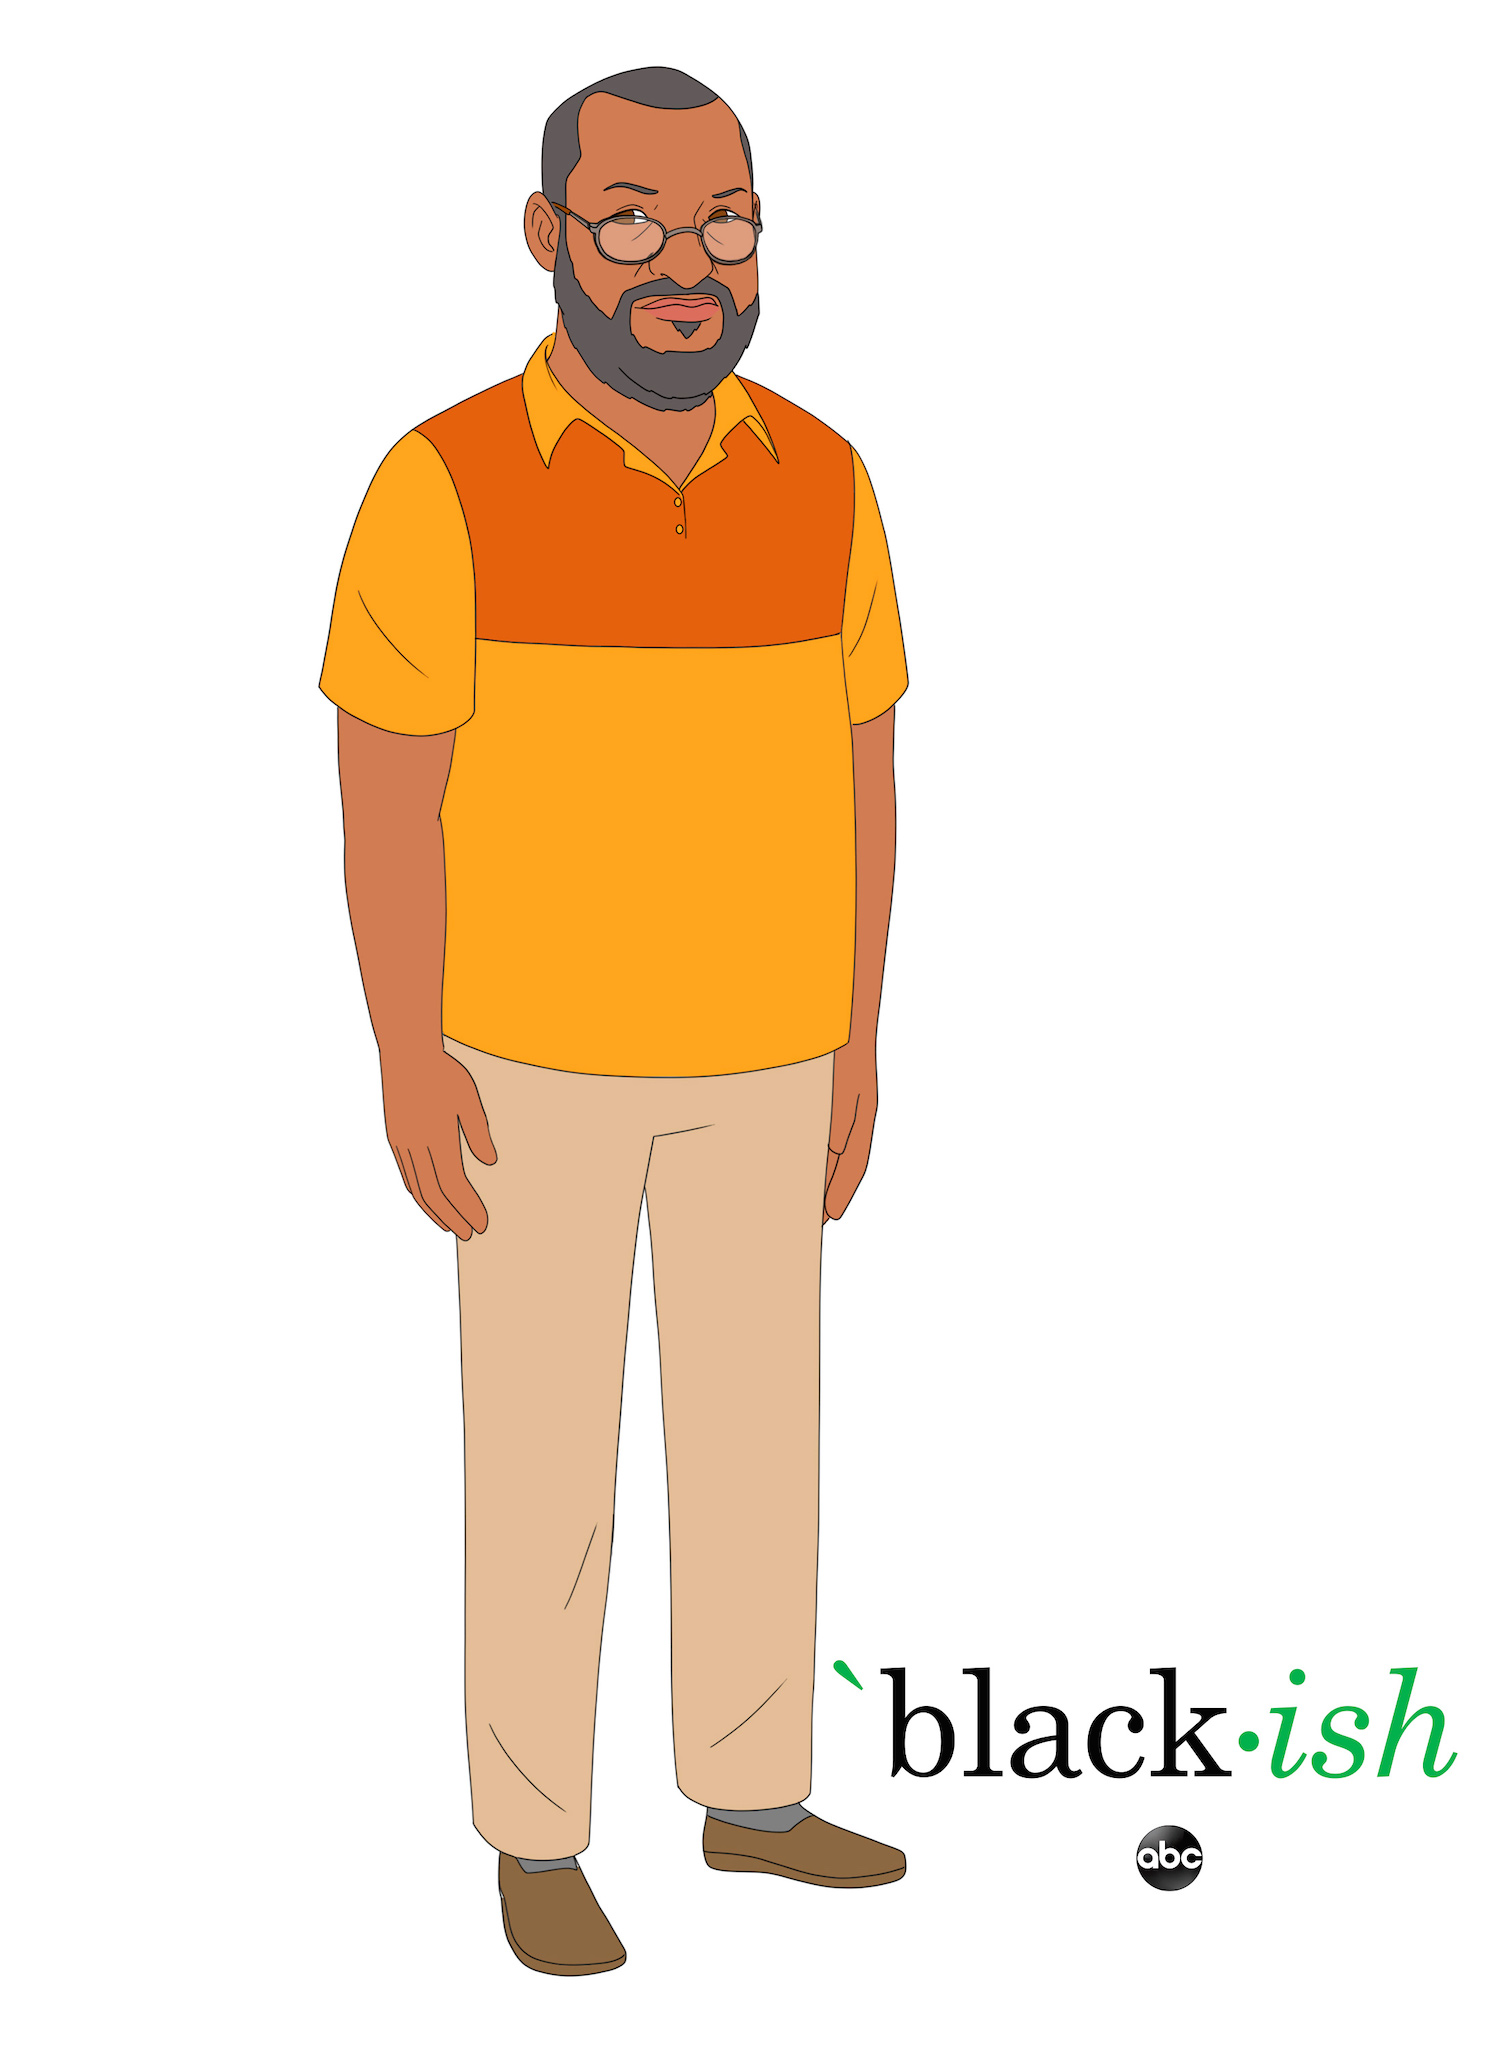 black-ish Animated Election Special Pops